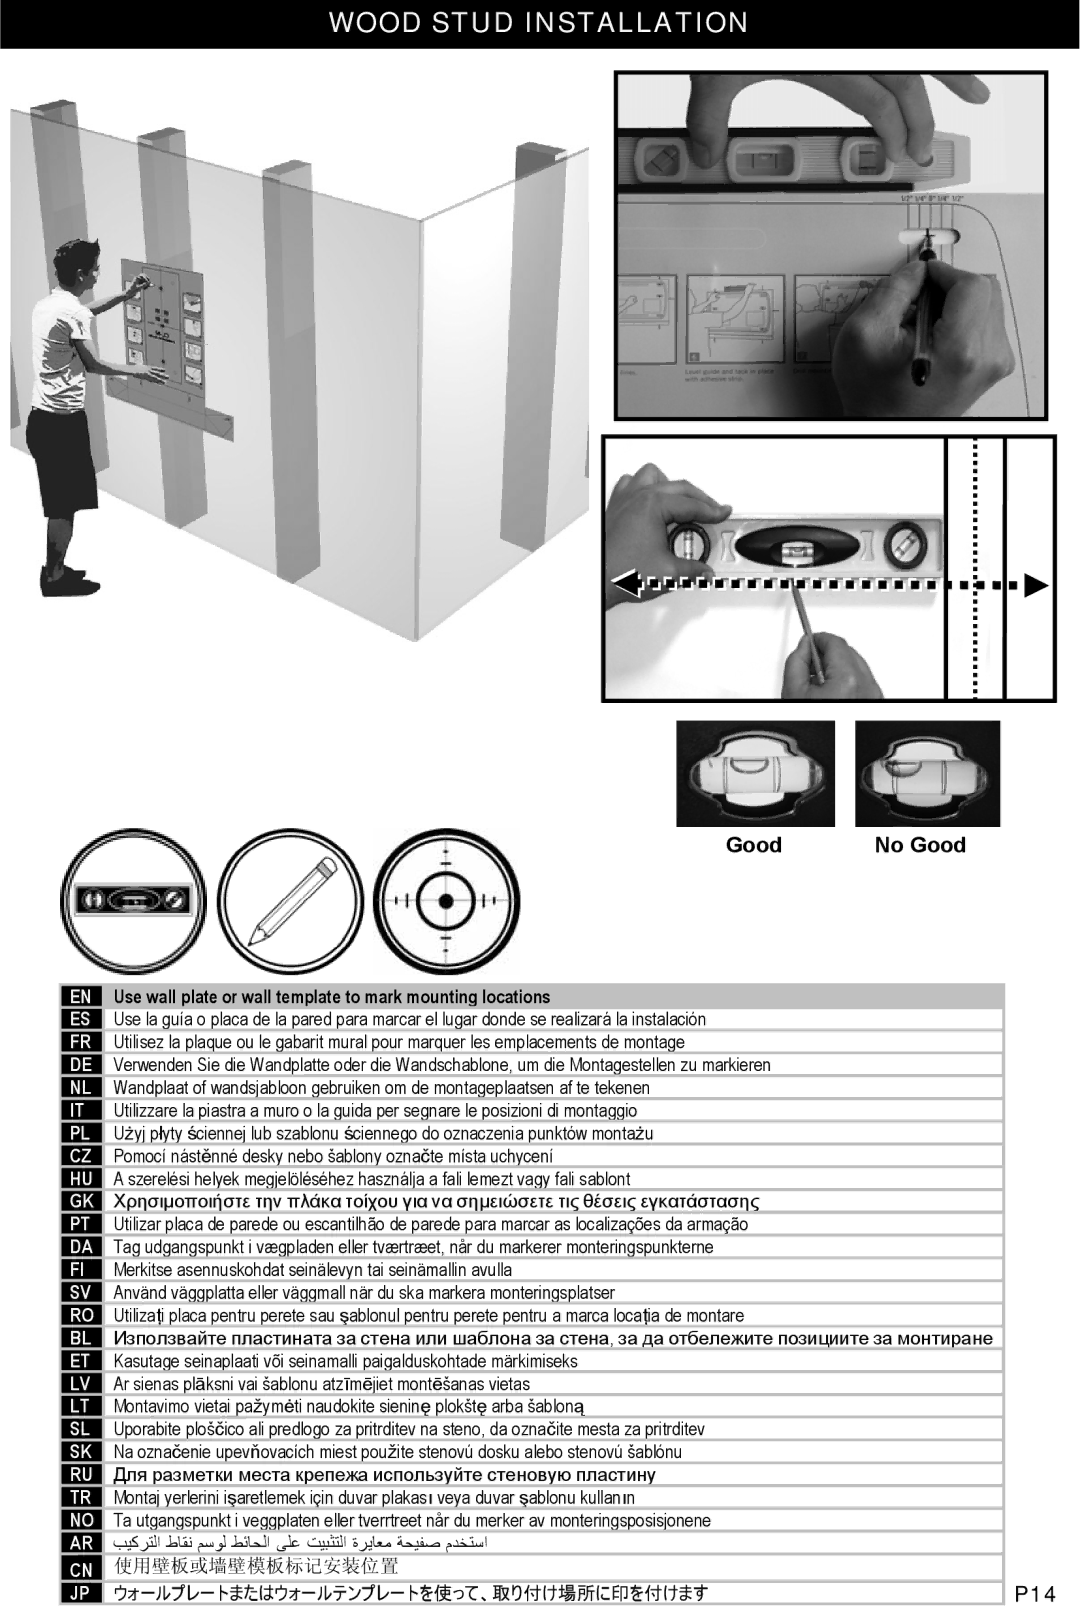 Omnimount CL-S, OM10033 instruction manual P14, Use wall plate or wall template to mark mounting locations 